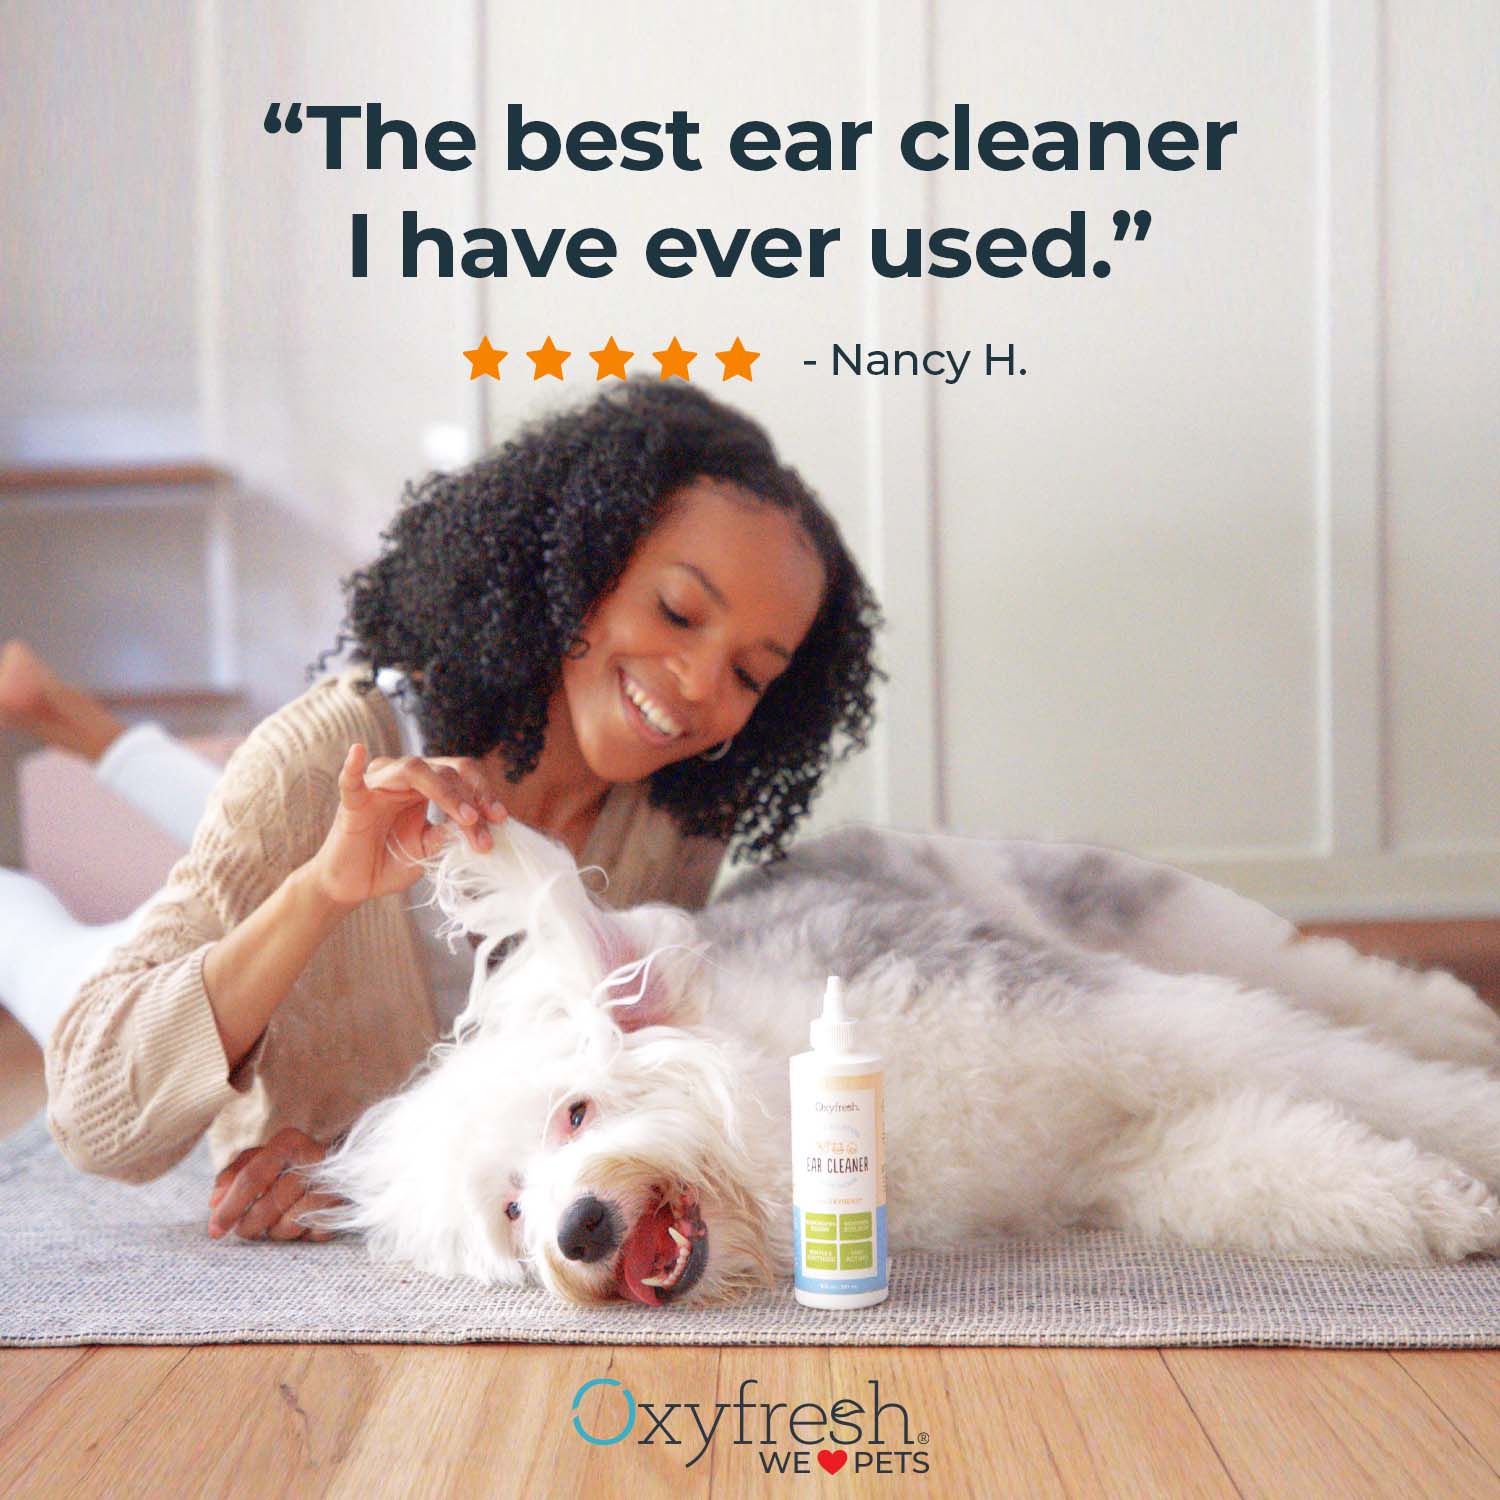 oxyfresh pet ear cleaner dog ear cleaning solution image of woman holding up smiling dog's ear with a review that says the best ear cleaner i have ever used by nancy h. 